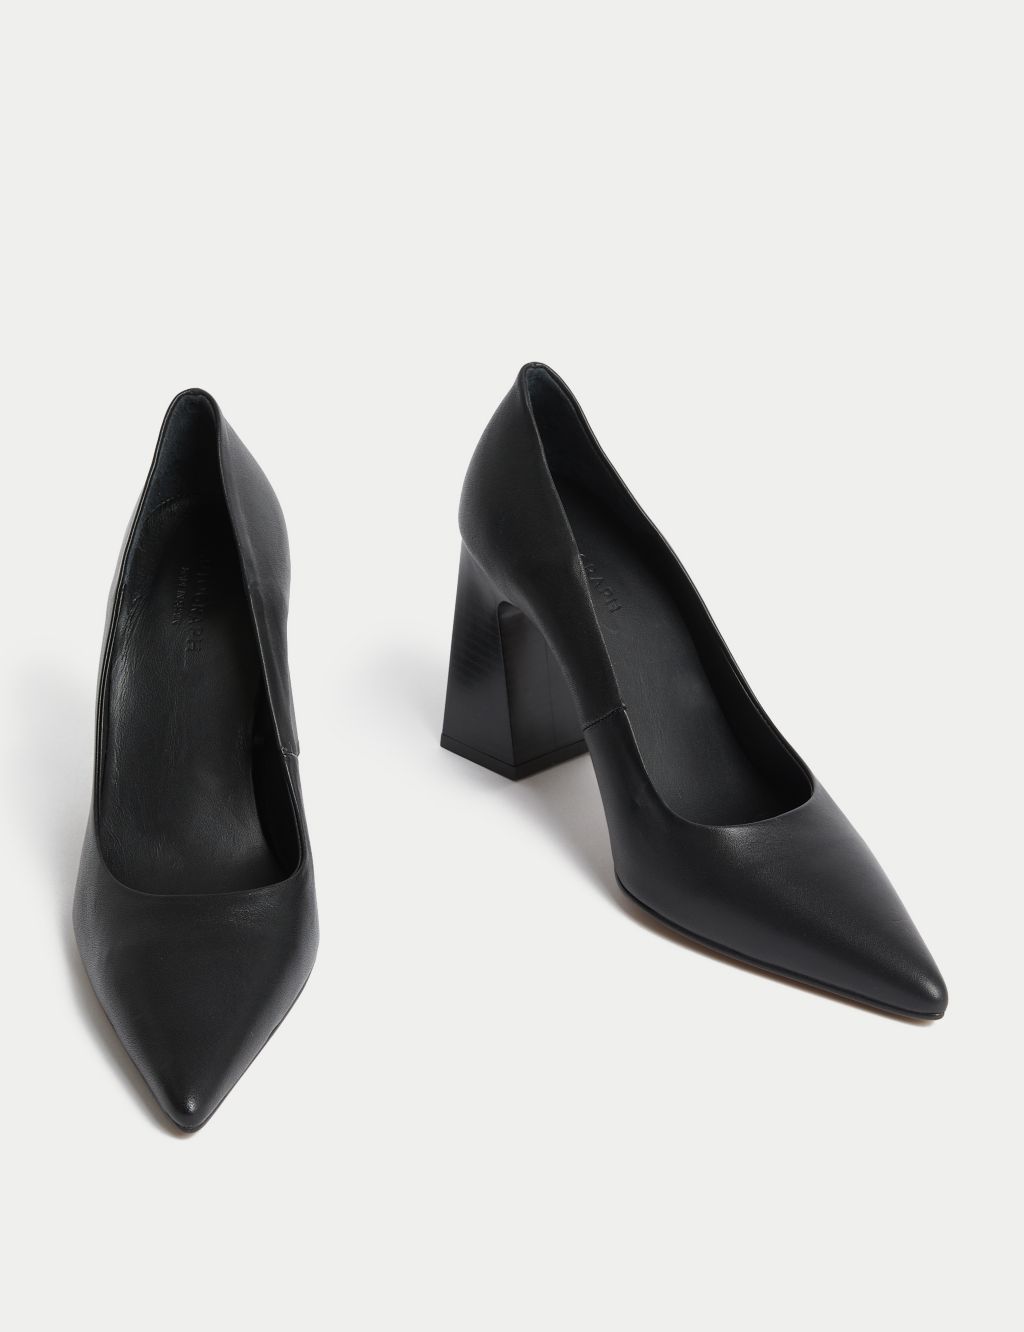 Leather Statement Pointed Toe Court Shoes image 2